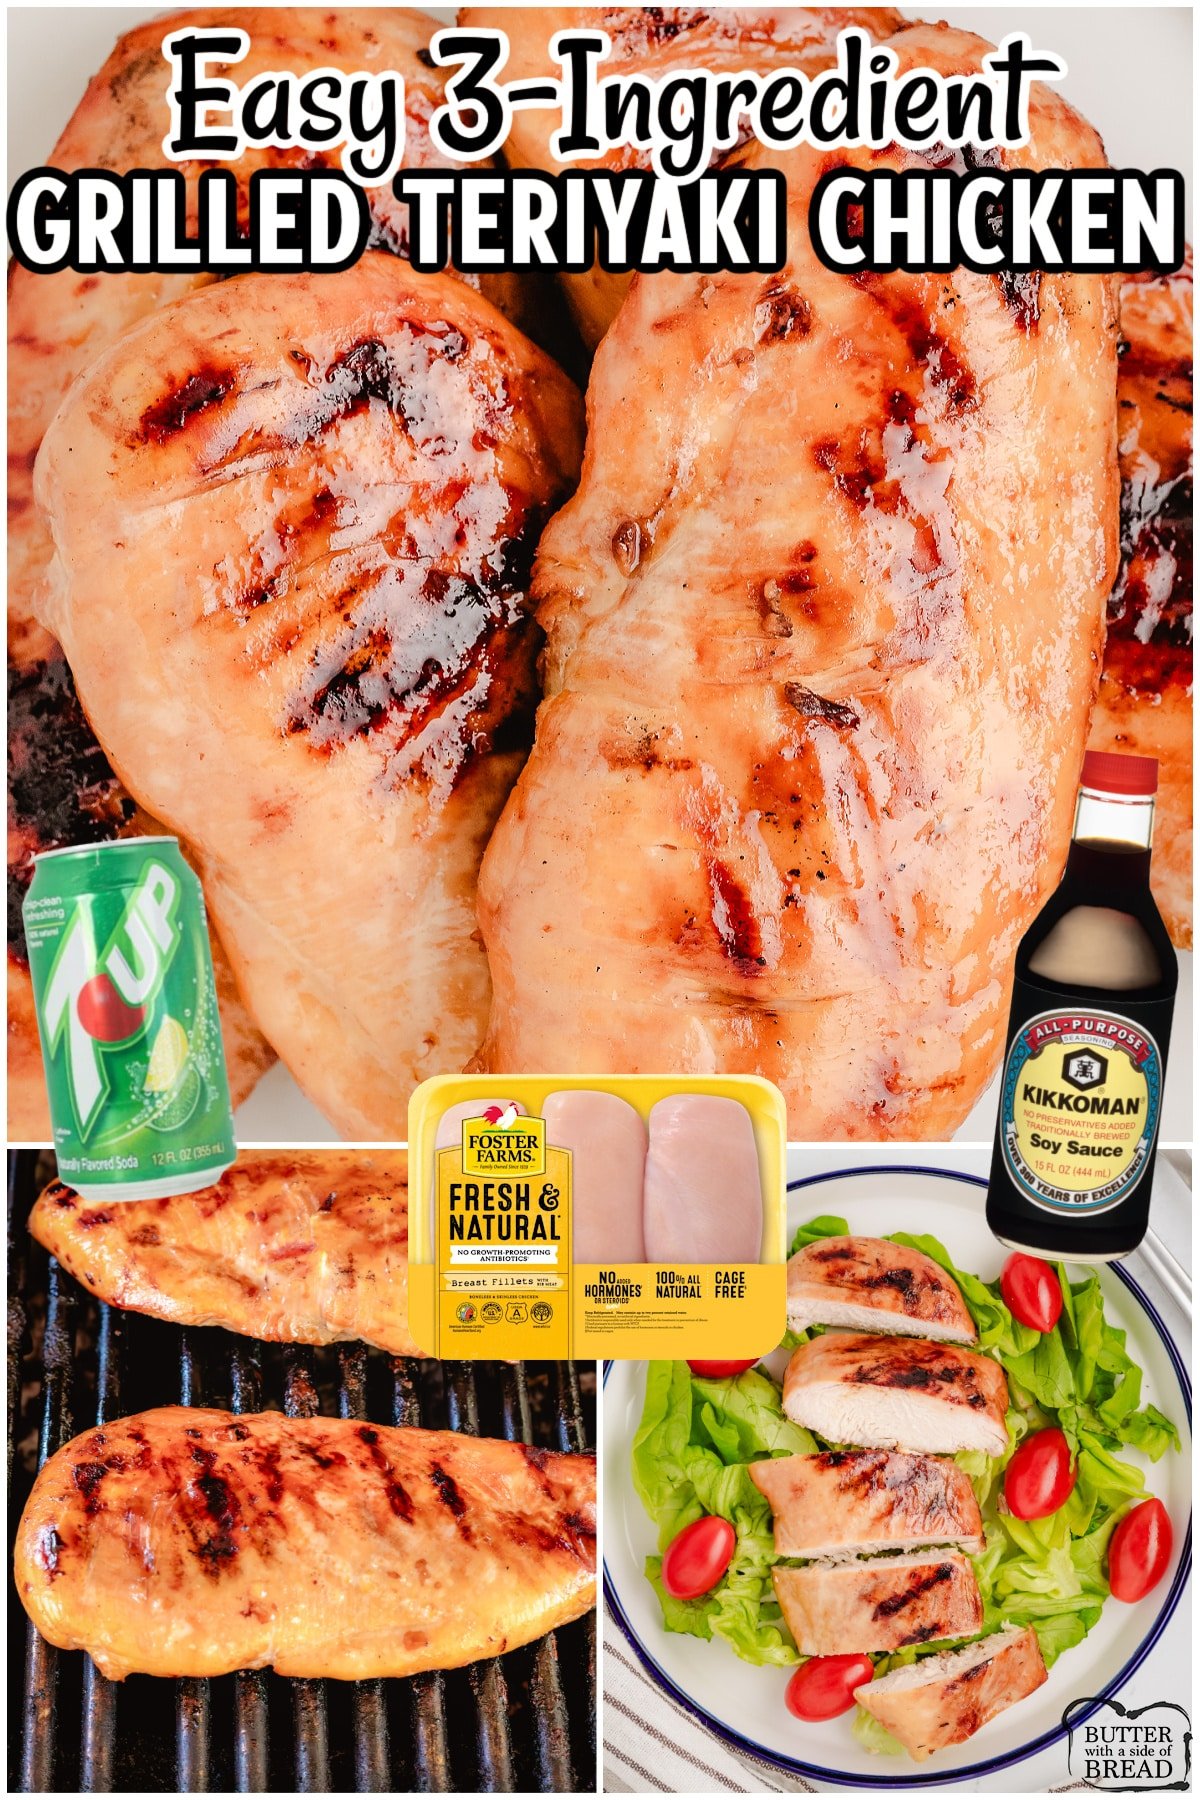 Grilled Teriyaki Chicken made with just 3 simple ingredients! Amazing teriyaki chicken marinade uses 7-Up to give the chicken a tangy, sweet flavor!